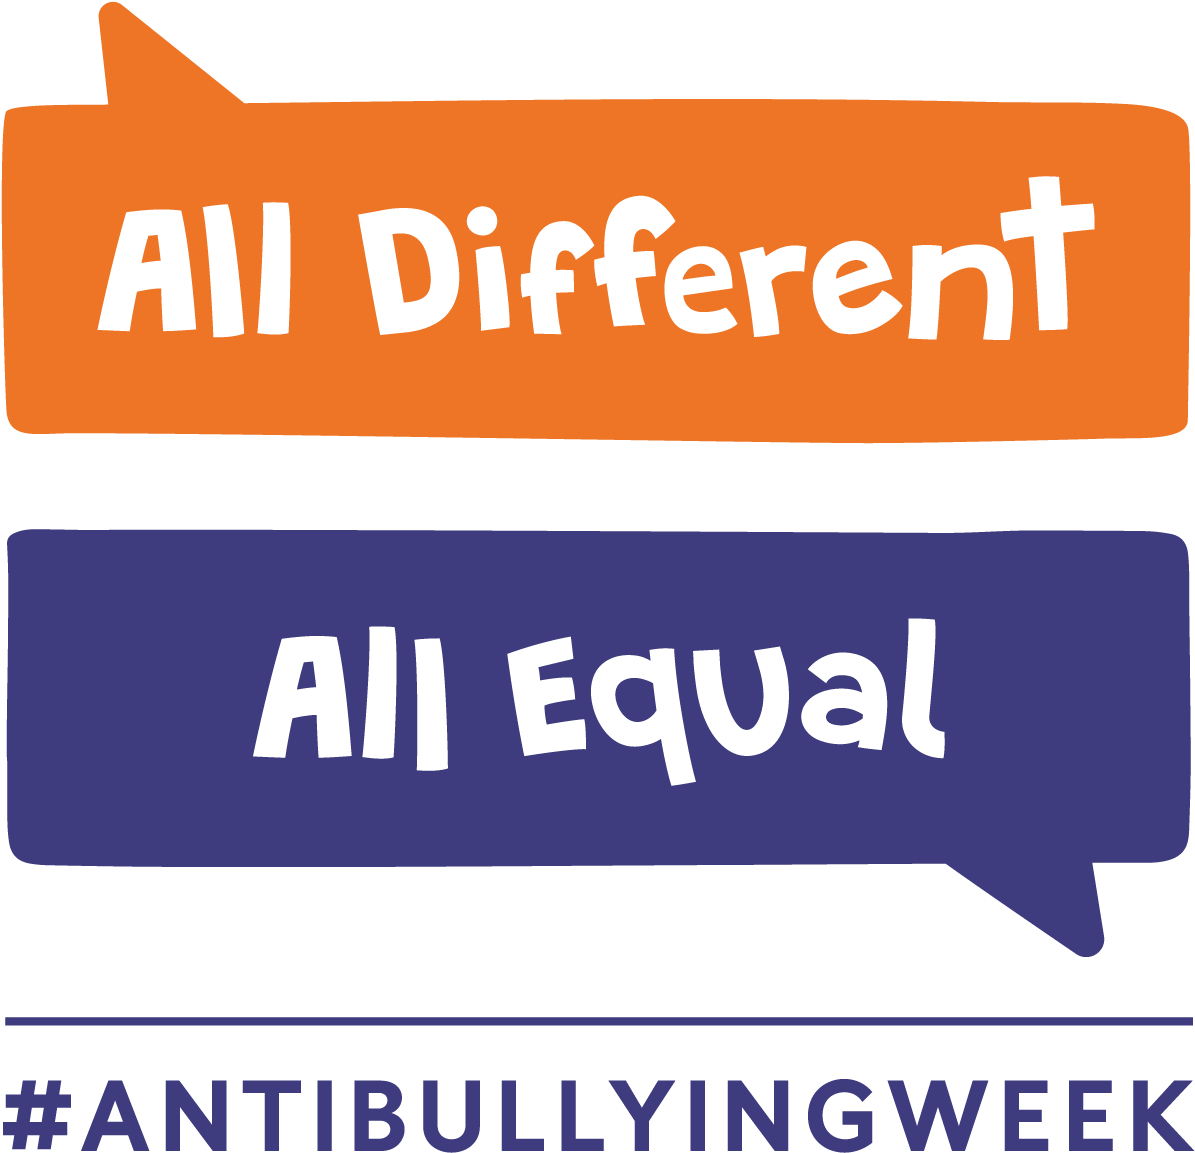 Pm 83996 Logo Original 5/18/2017 - Anti Bullying Week 2017 All Different All Equal (2250x2250), Png Download